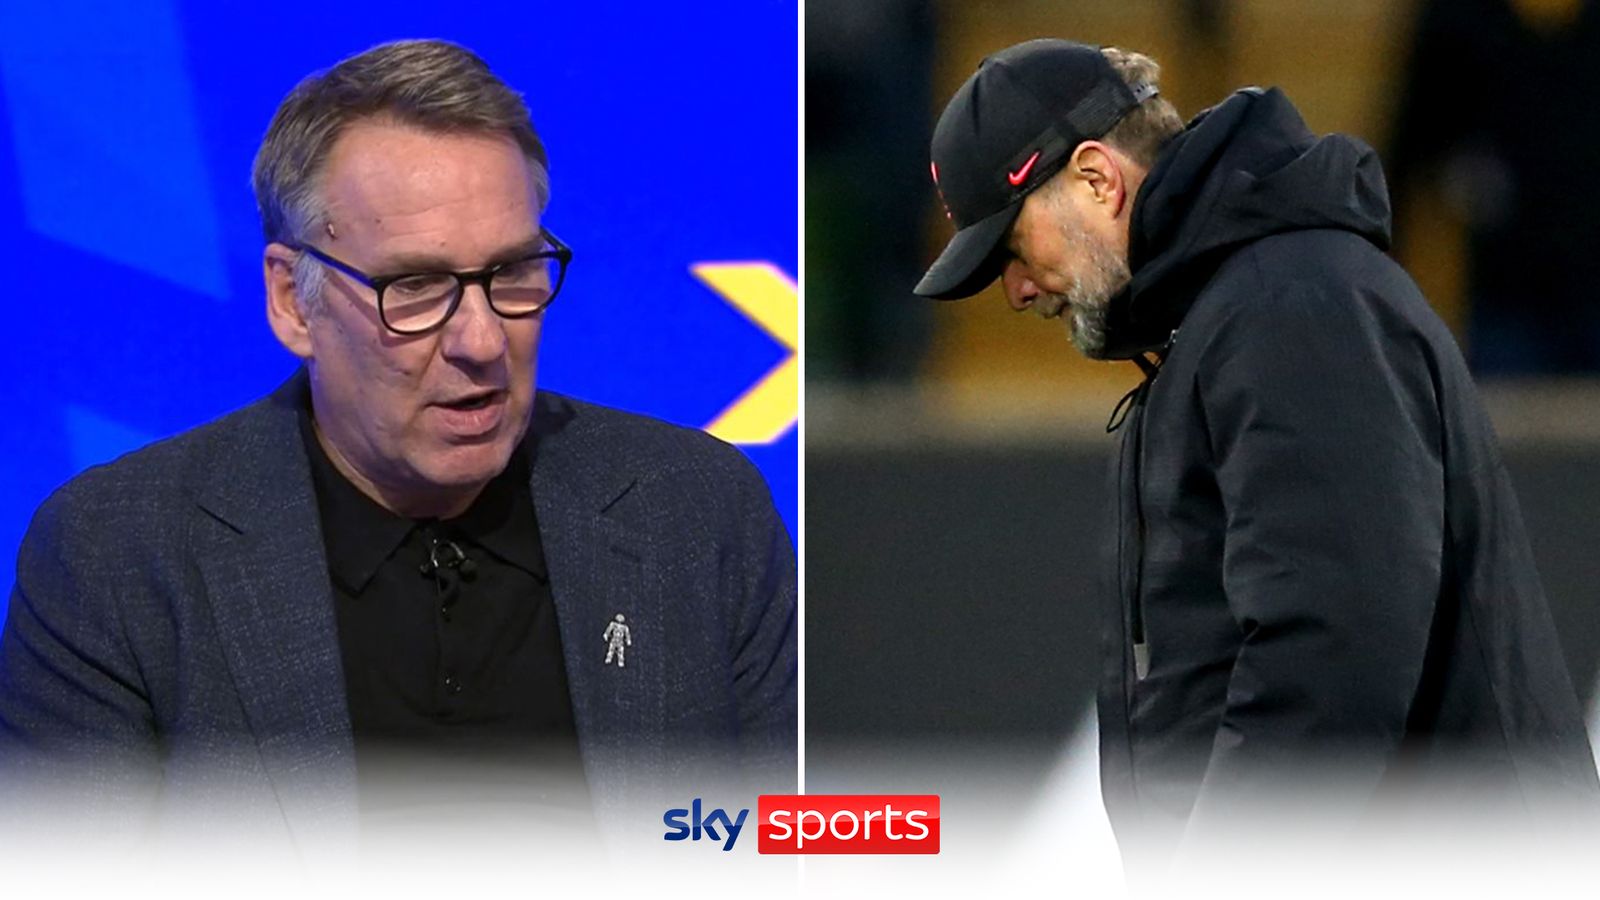 Jurgen Klopp on Liverpool’s ‘horrible start’ in defeat at Wolves: ‘How can I not be concerned?’ | Paul Merson: ‘Miles off it’